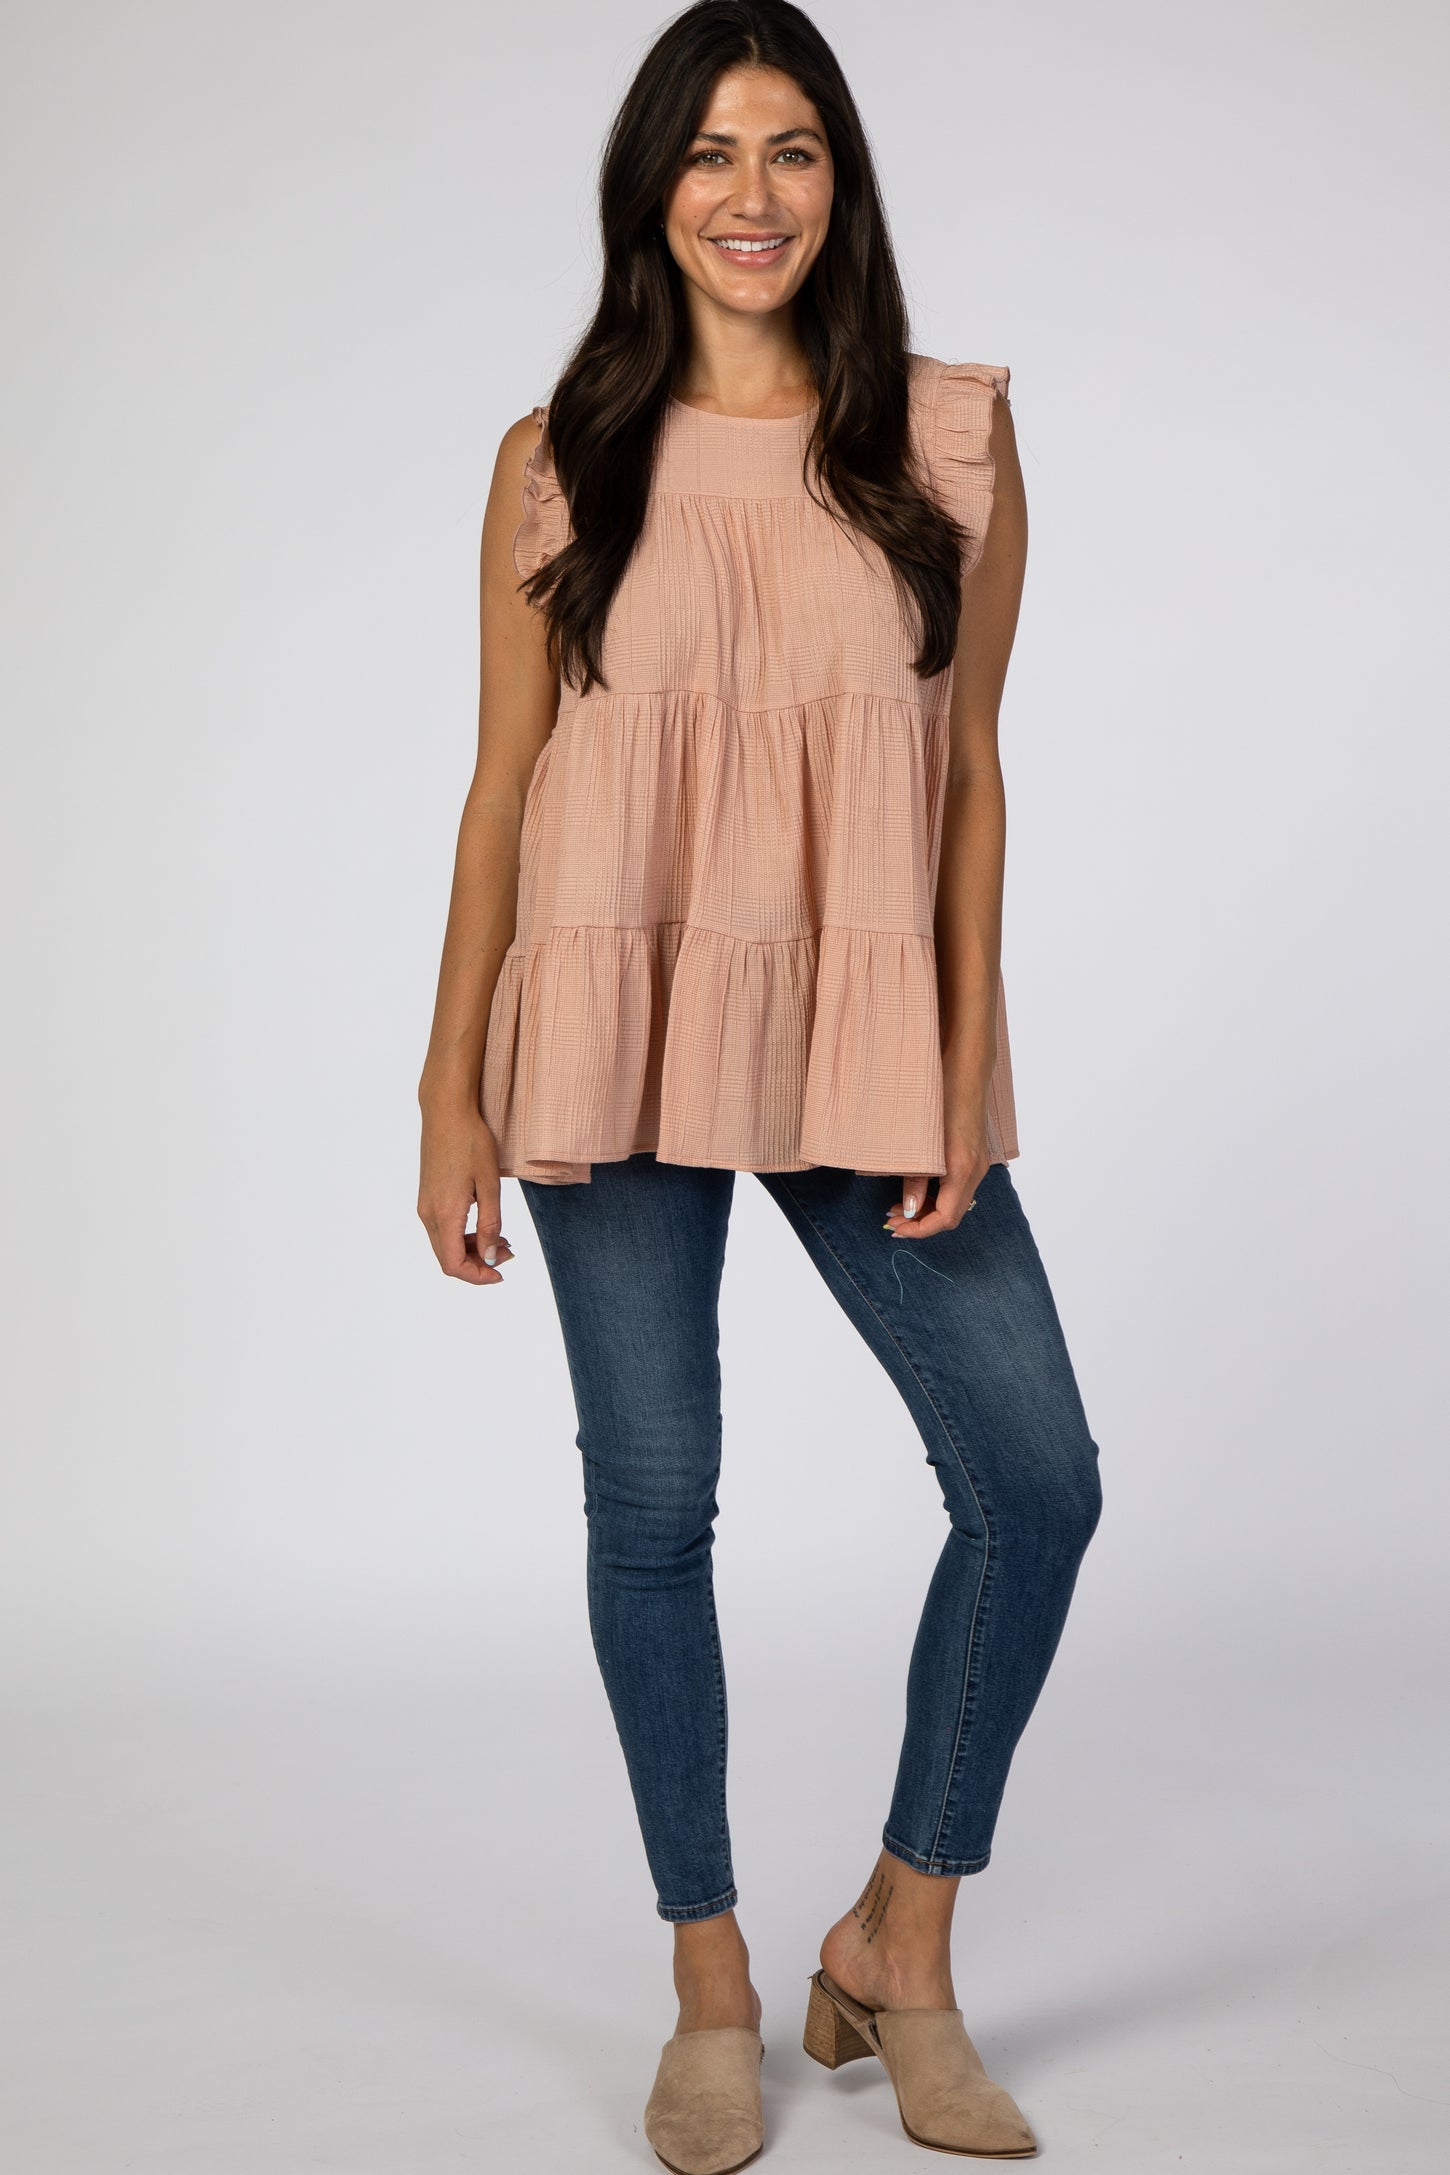 Peach Textured Tiered Blouse